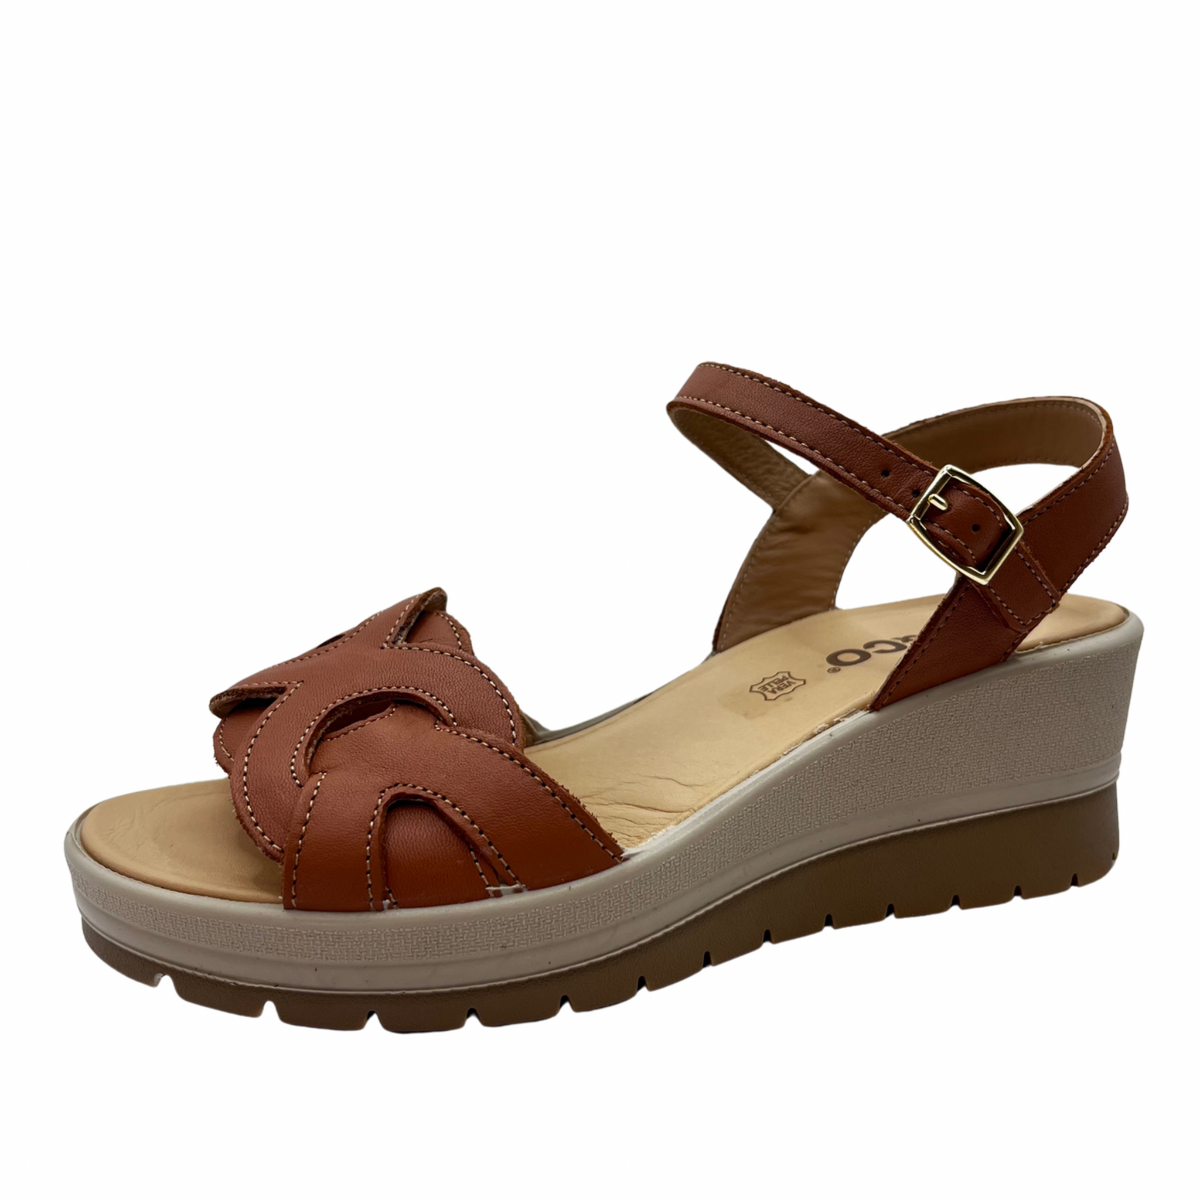 Igi &amp; Co Brown and Tan Leather Wedge Sandal